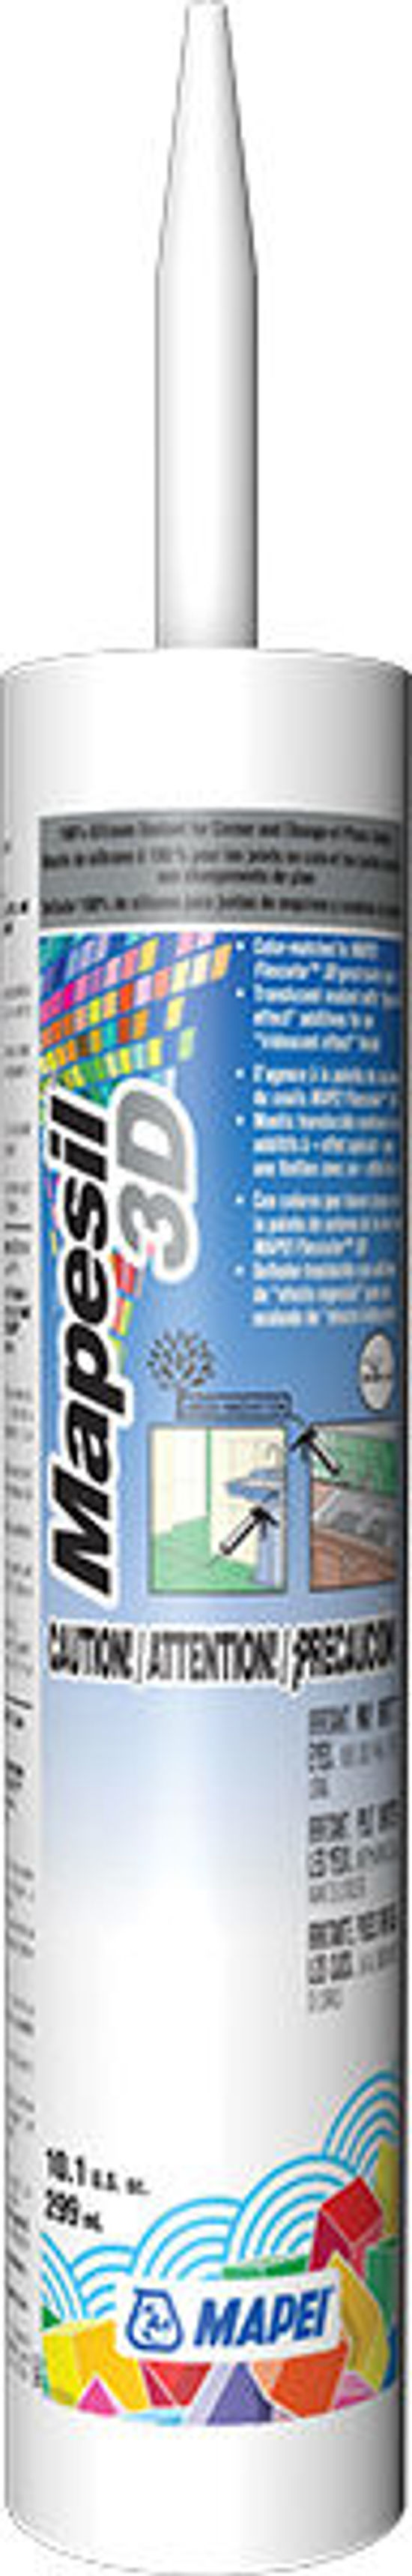 Mapesil 3D 100% Silicone Sealant with an “Iridescent Effect” #5209 Morning Dew 10.11 oz